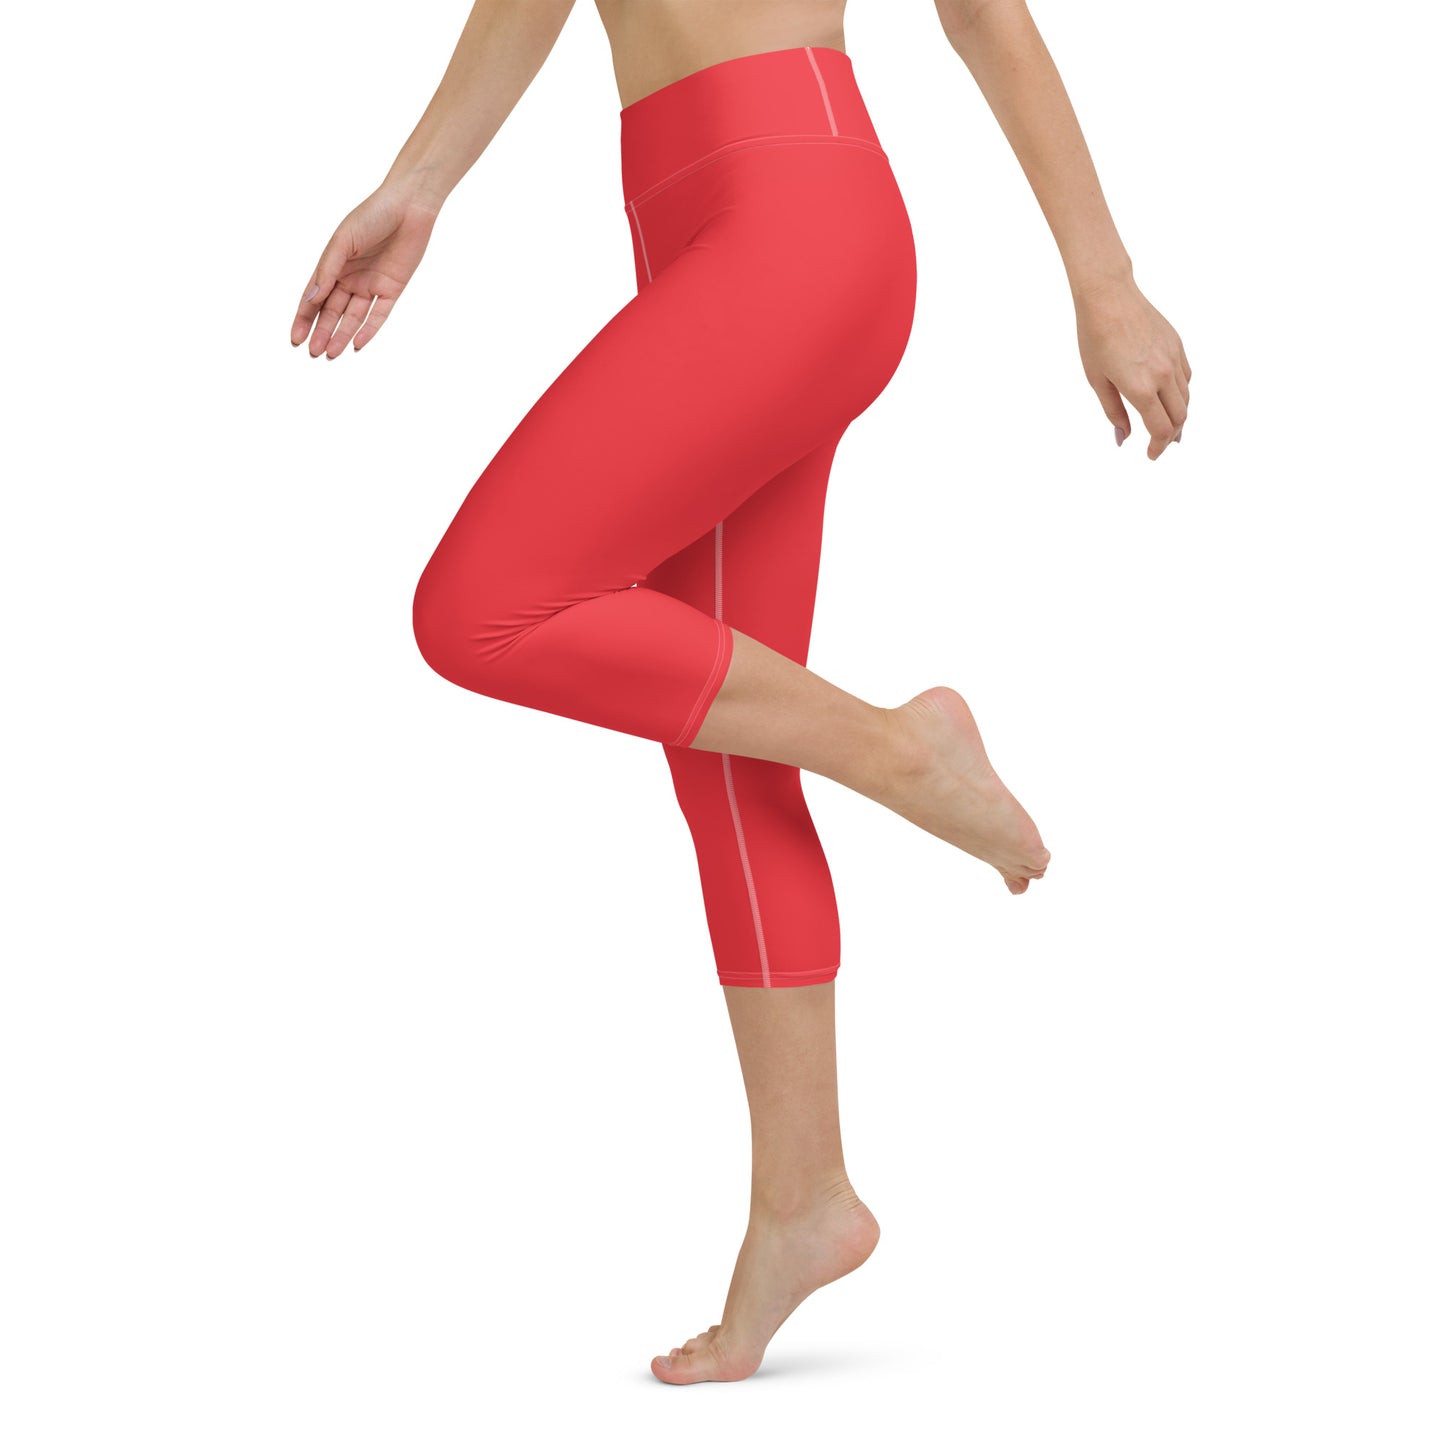 Nord Solid Red Capri High Waist Yoga Leggings / Pants with Inside Pocket